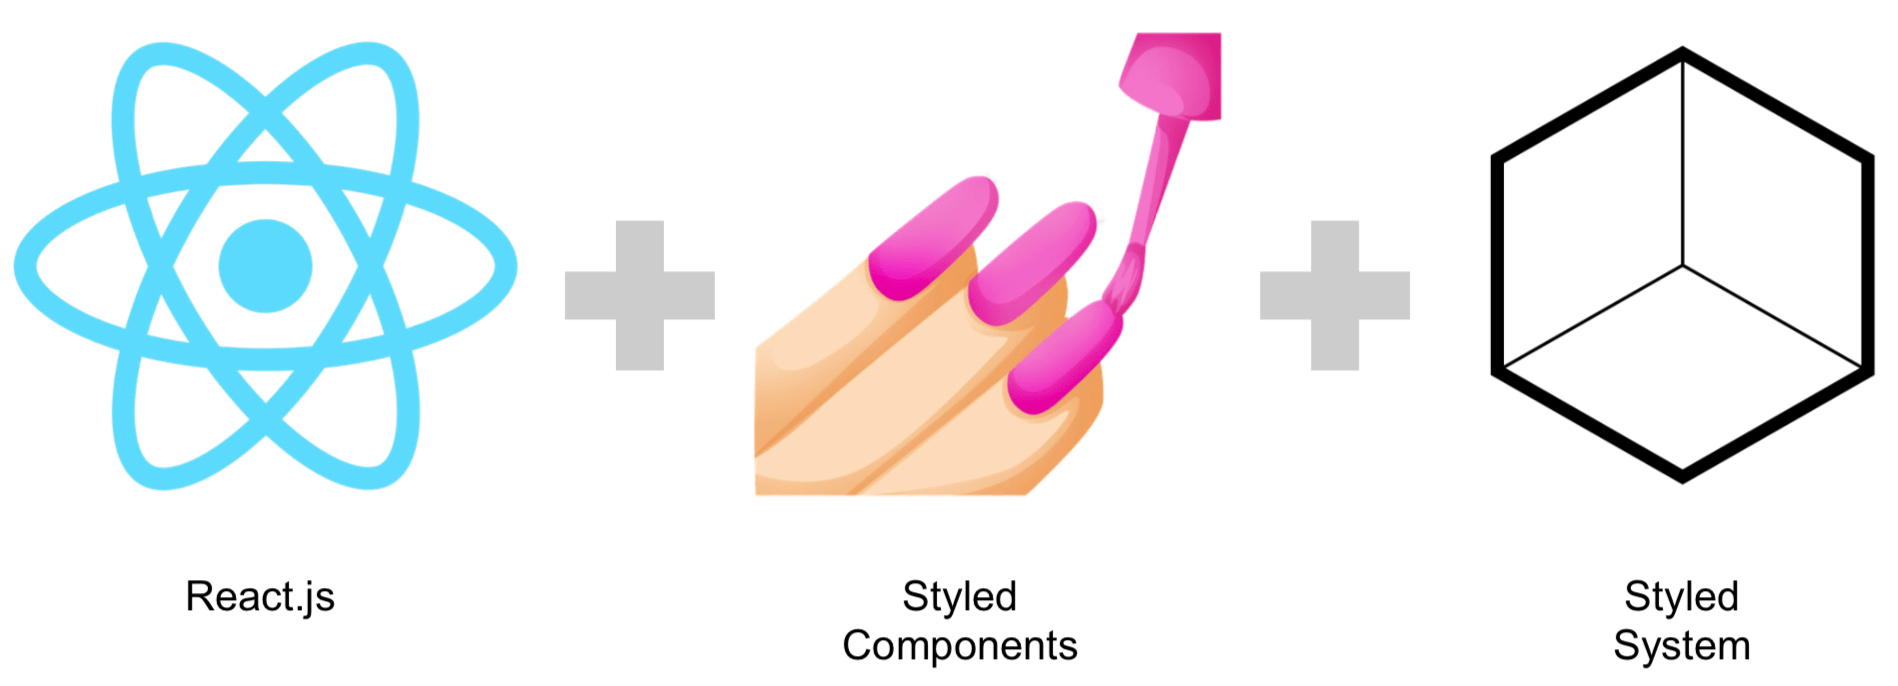 React + Styled Components + Styled System